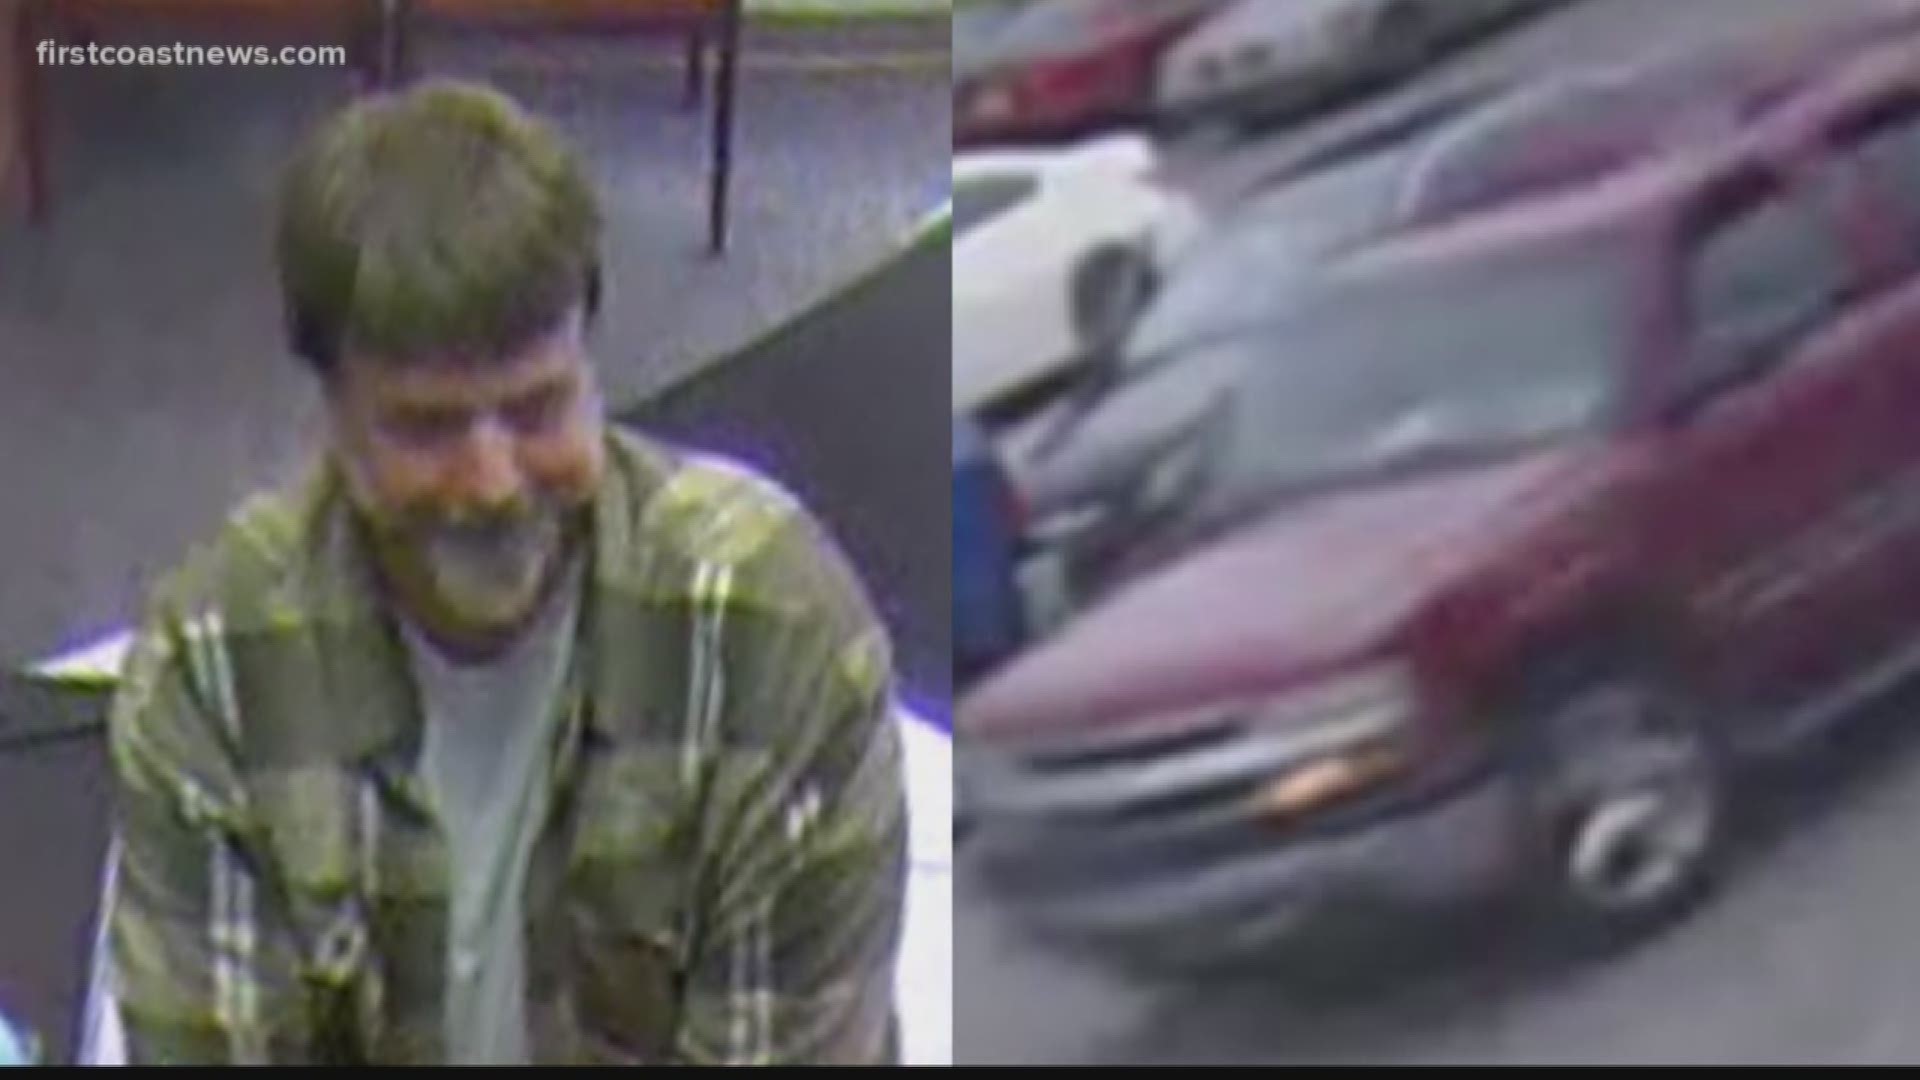 Police need the help of the public in finding the robbery suspect.